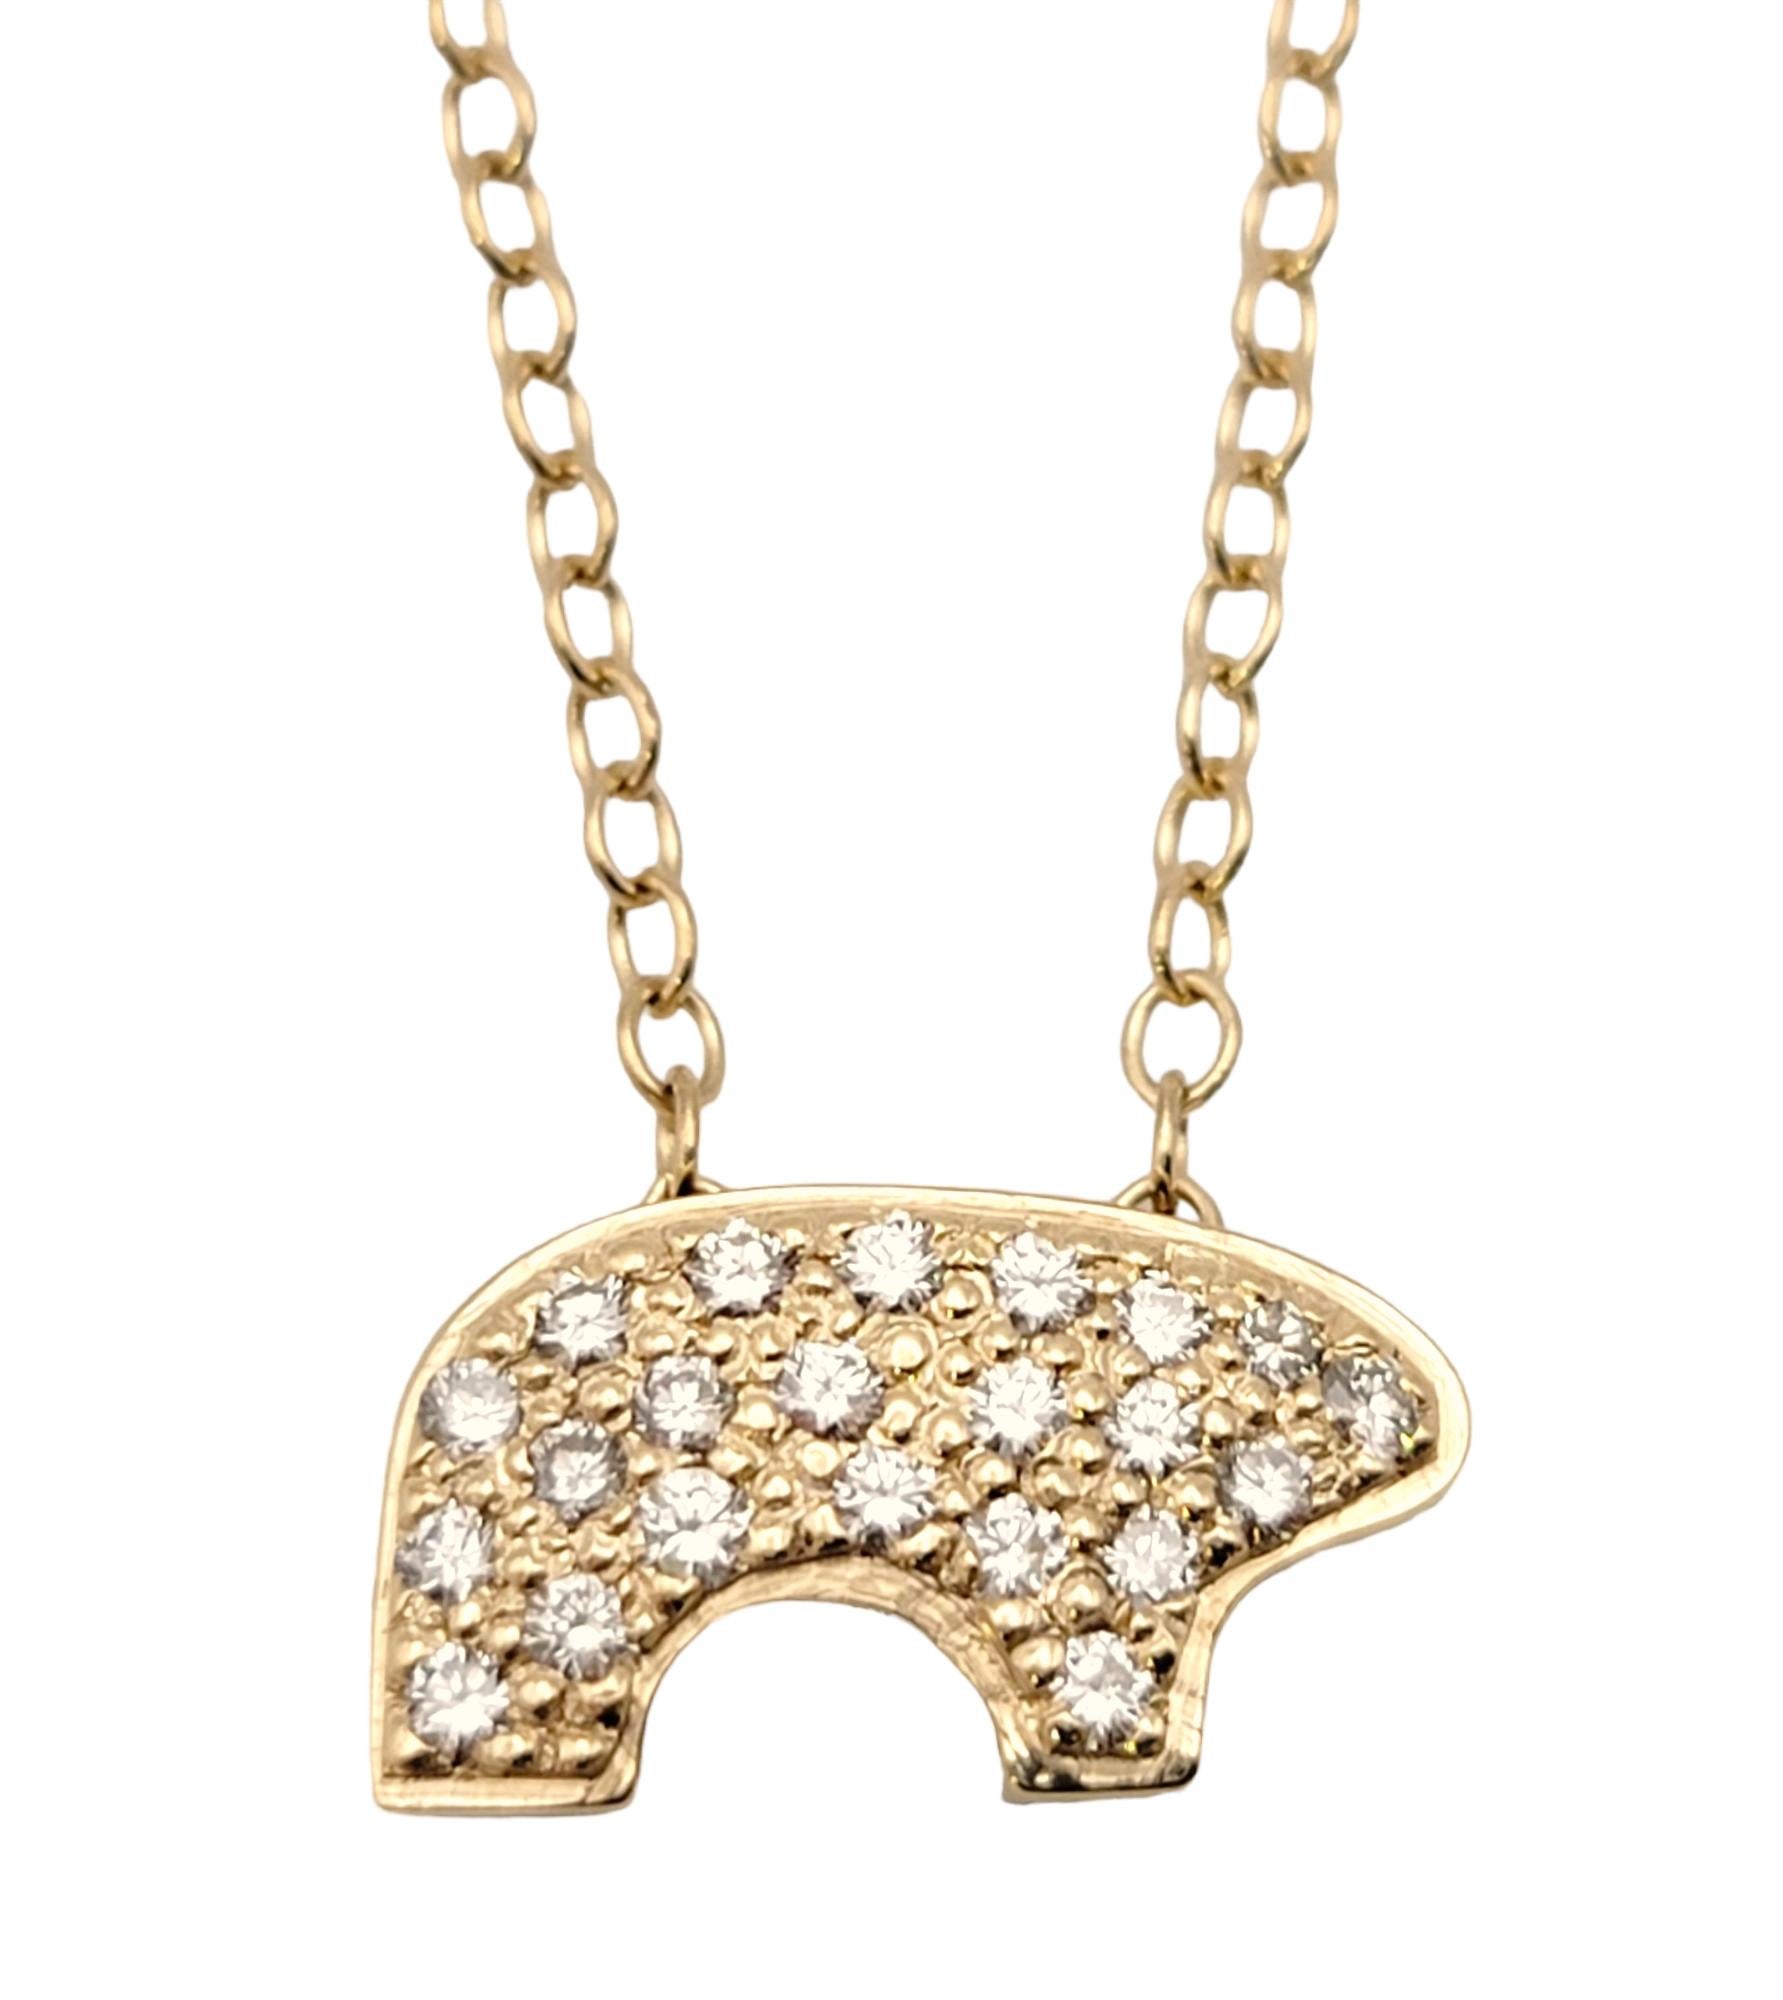 Recognizable pendant necklace designed by The Golden Bear.  Founded in Vail, Colorado in 1975, the Golden Bear store's distinctive little bruin would become recognized as 